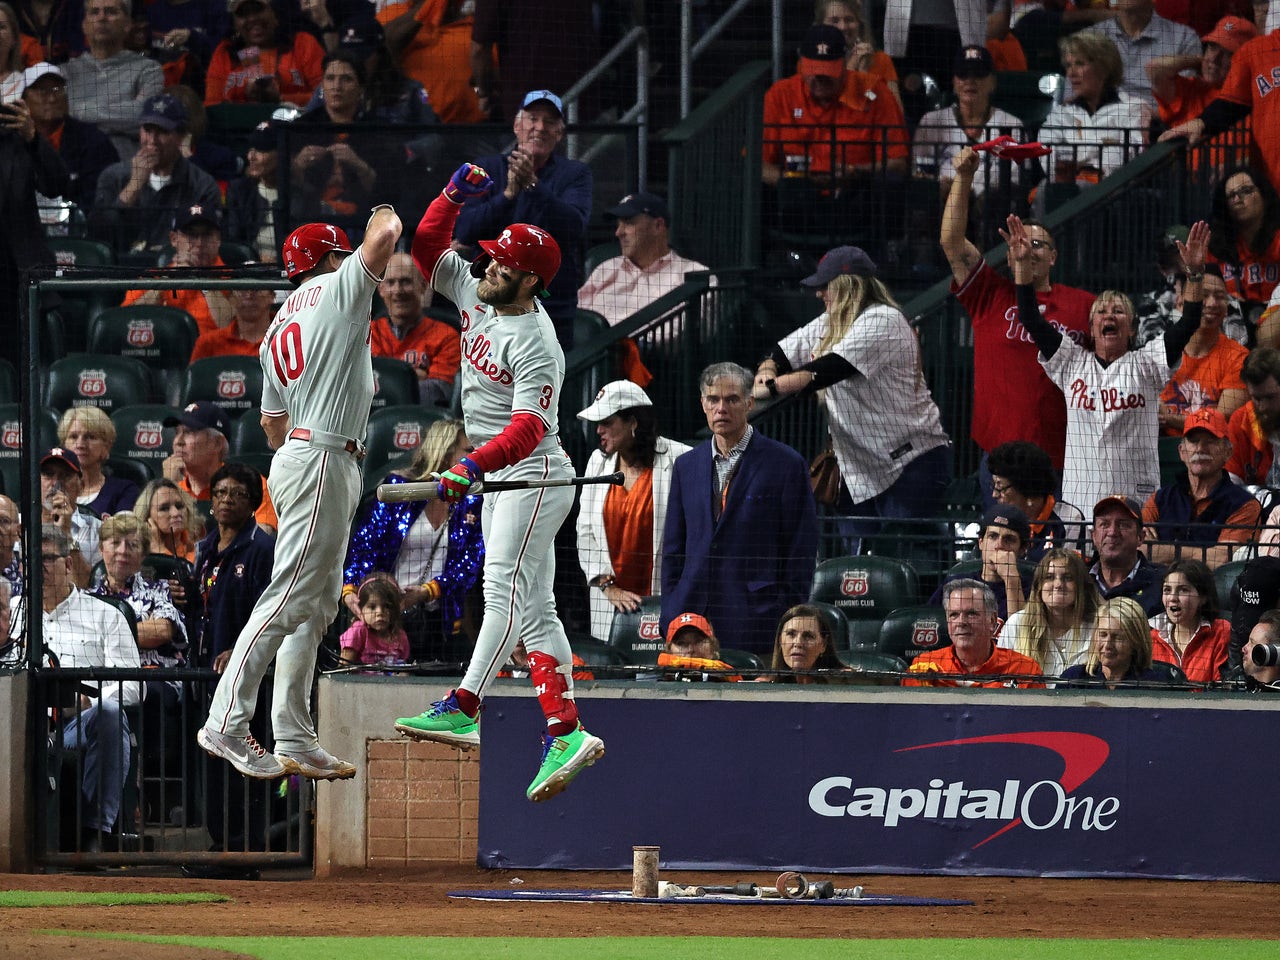 2022 World Series: Phillies complete historic comeback in Game 1